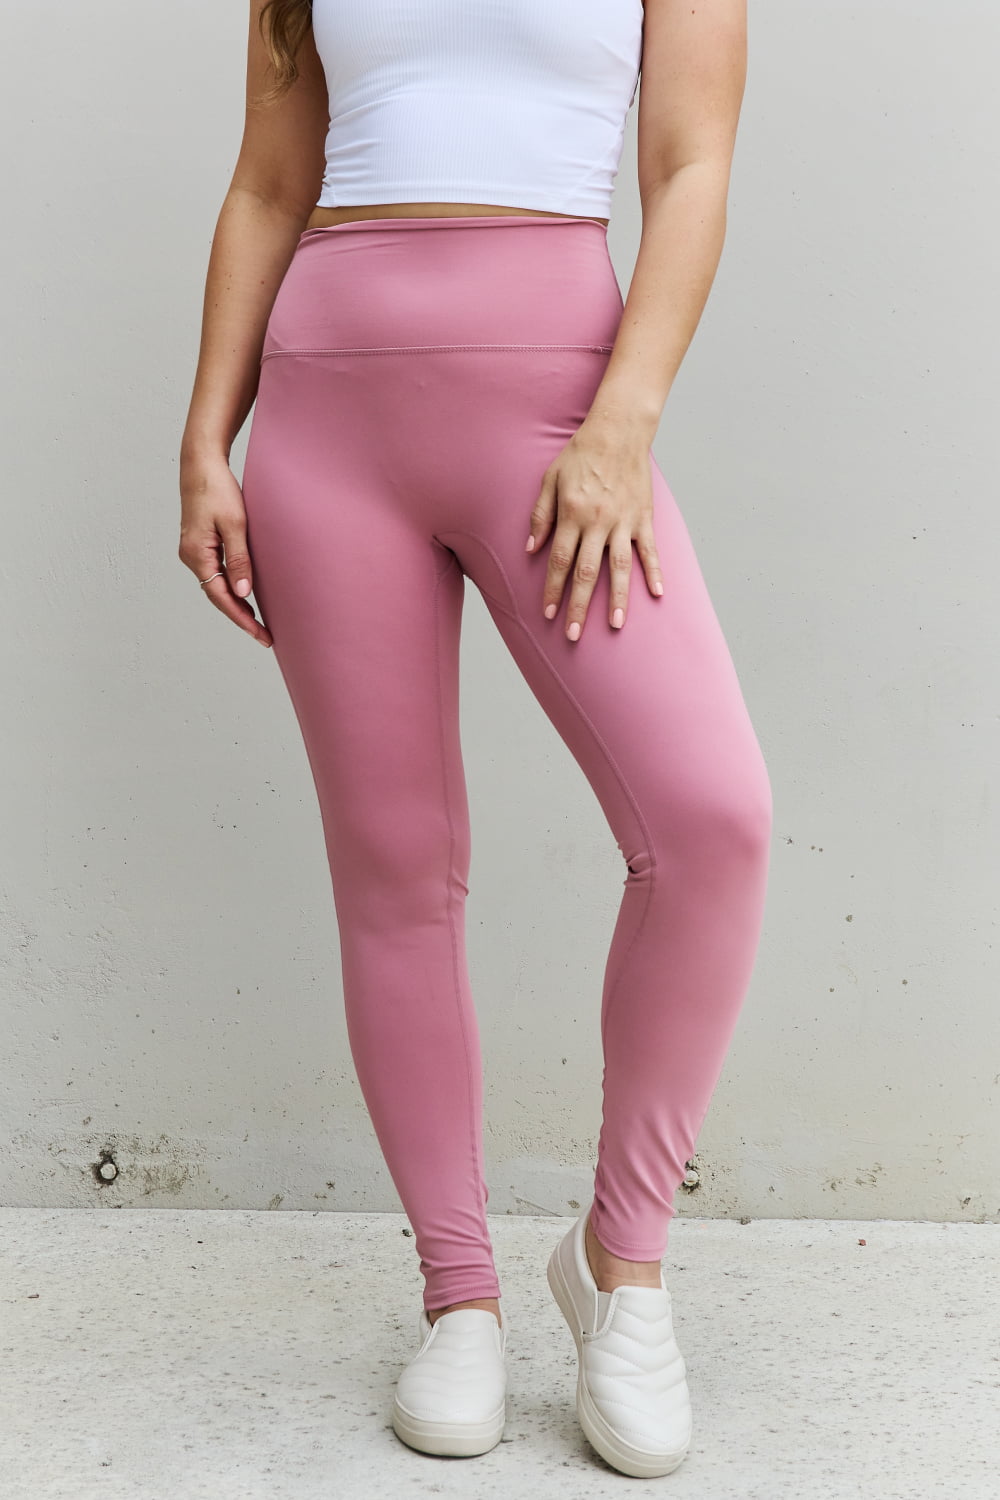 Fit For You Full Size High Waist Active Leggings in Light Rose - Women’s Clothing & Accessories - Activewear - 3 - 2024